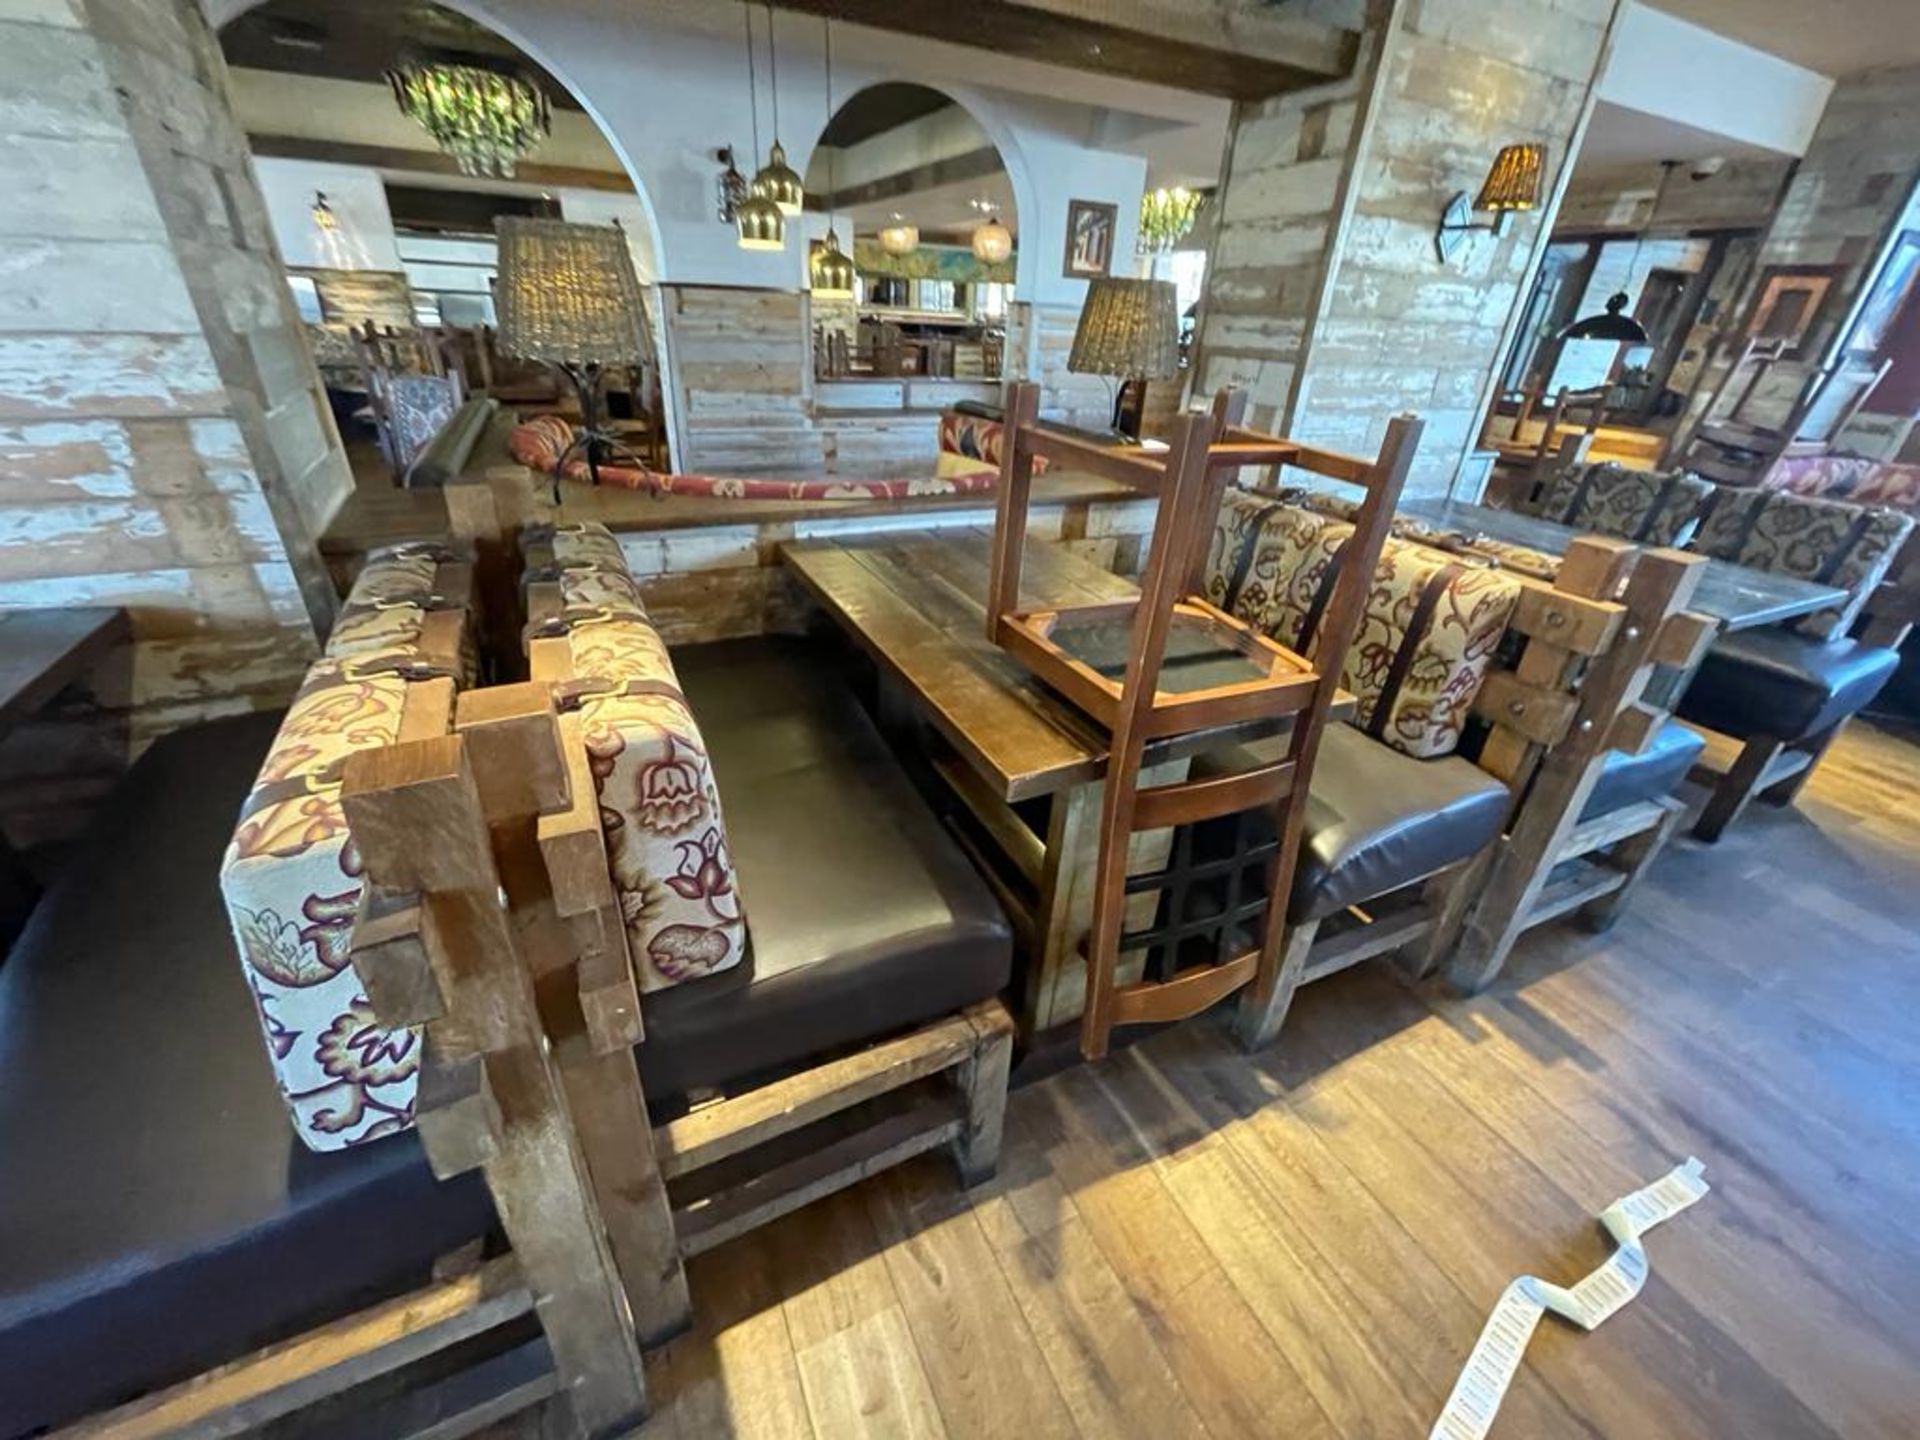 2 x Rustic Seating Benches Featuring Timber Frames, Brown Faux Leather Seat Pads and Floral Fabric - Image 2 of 13